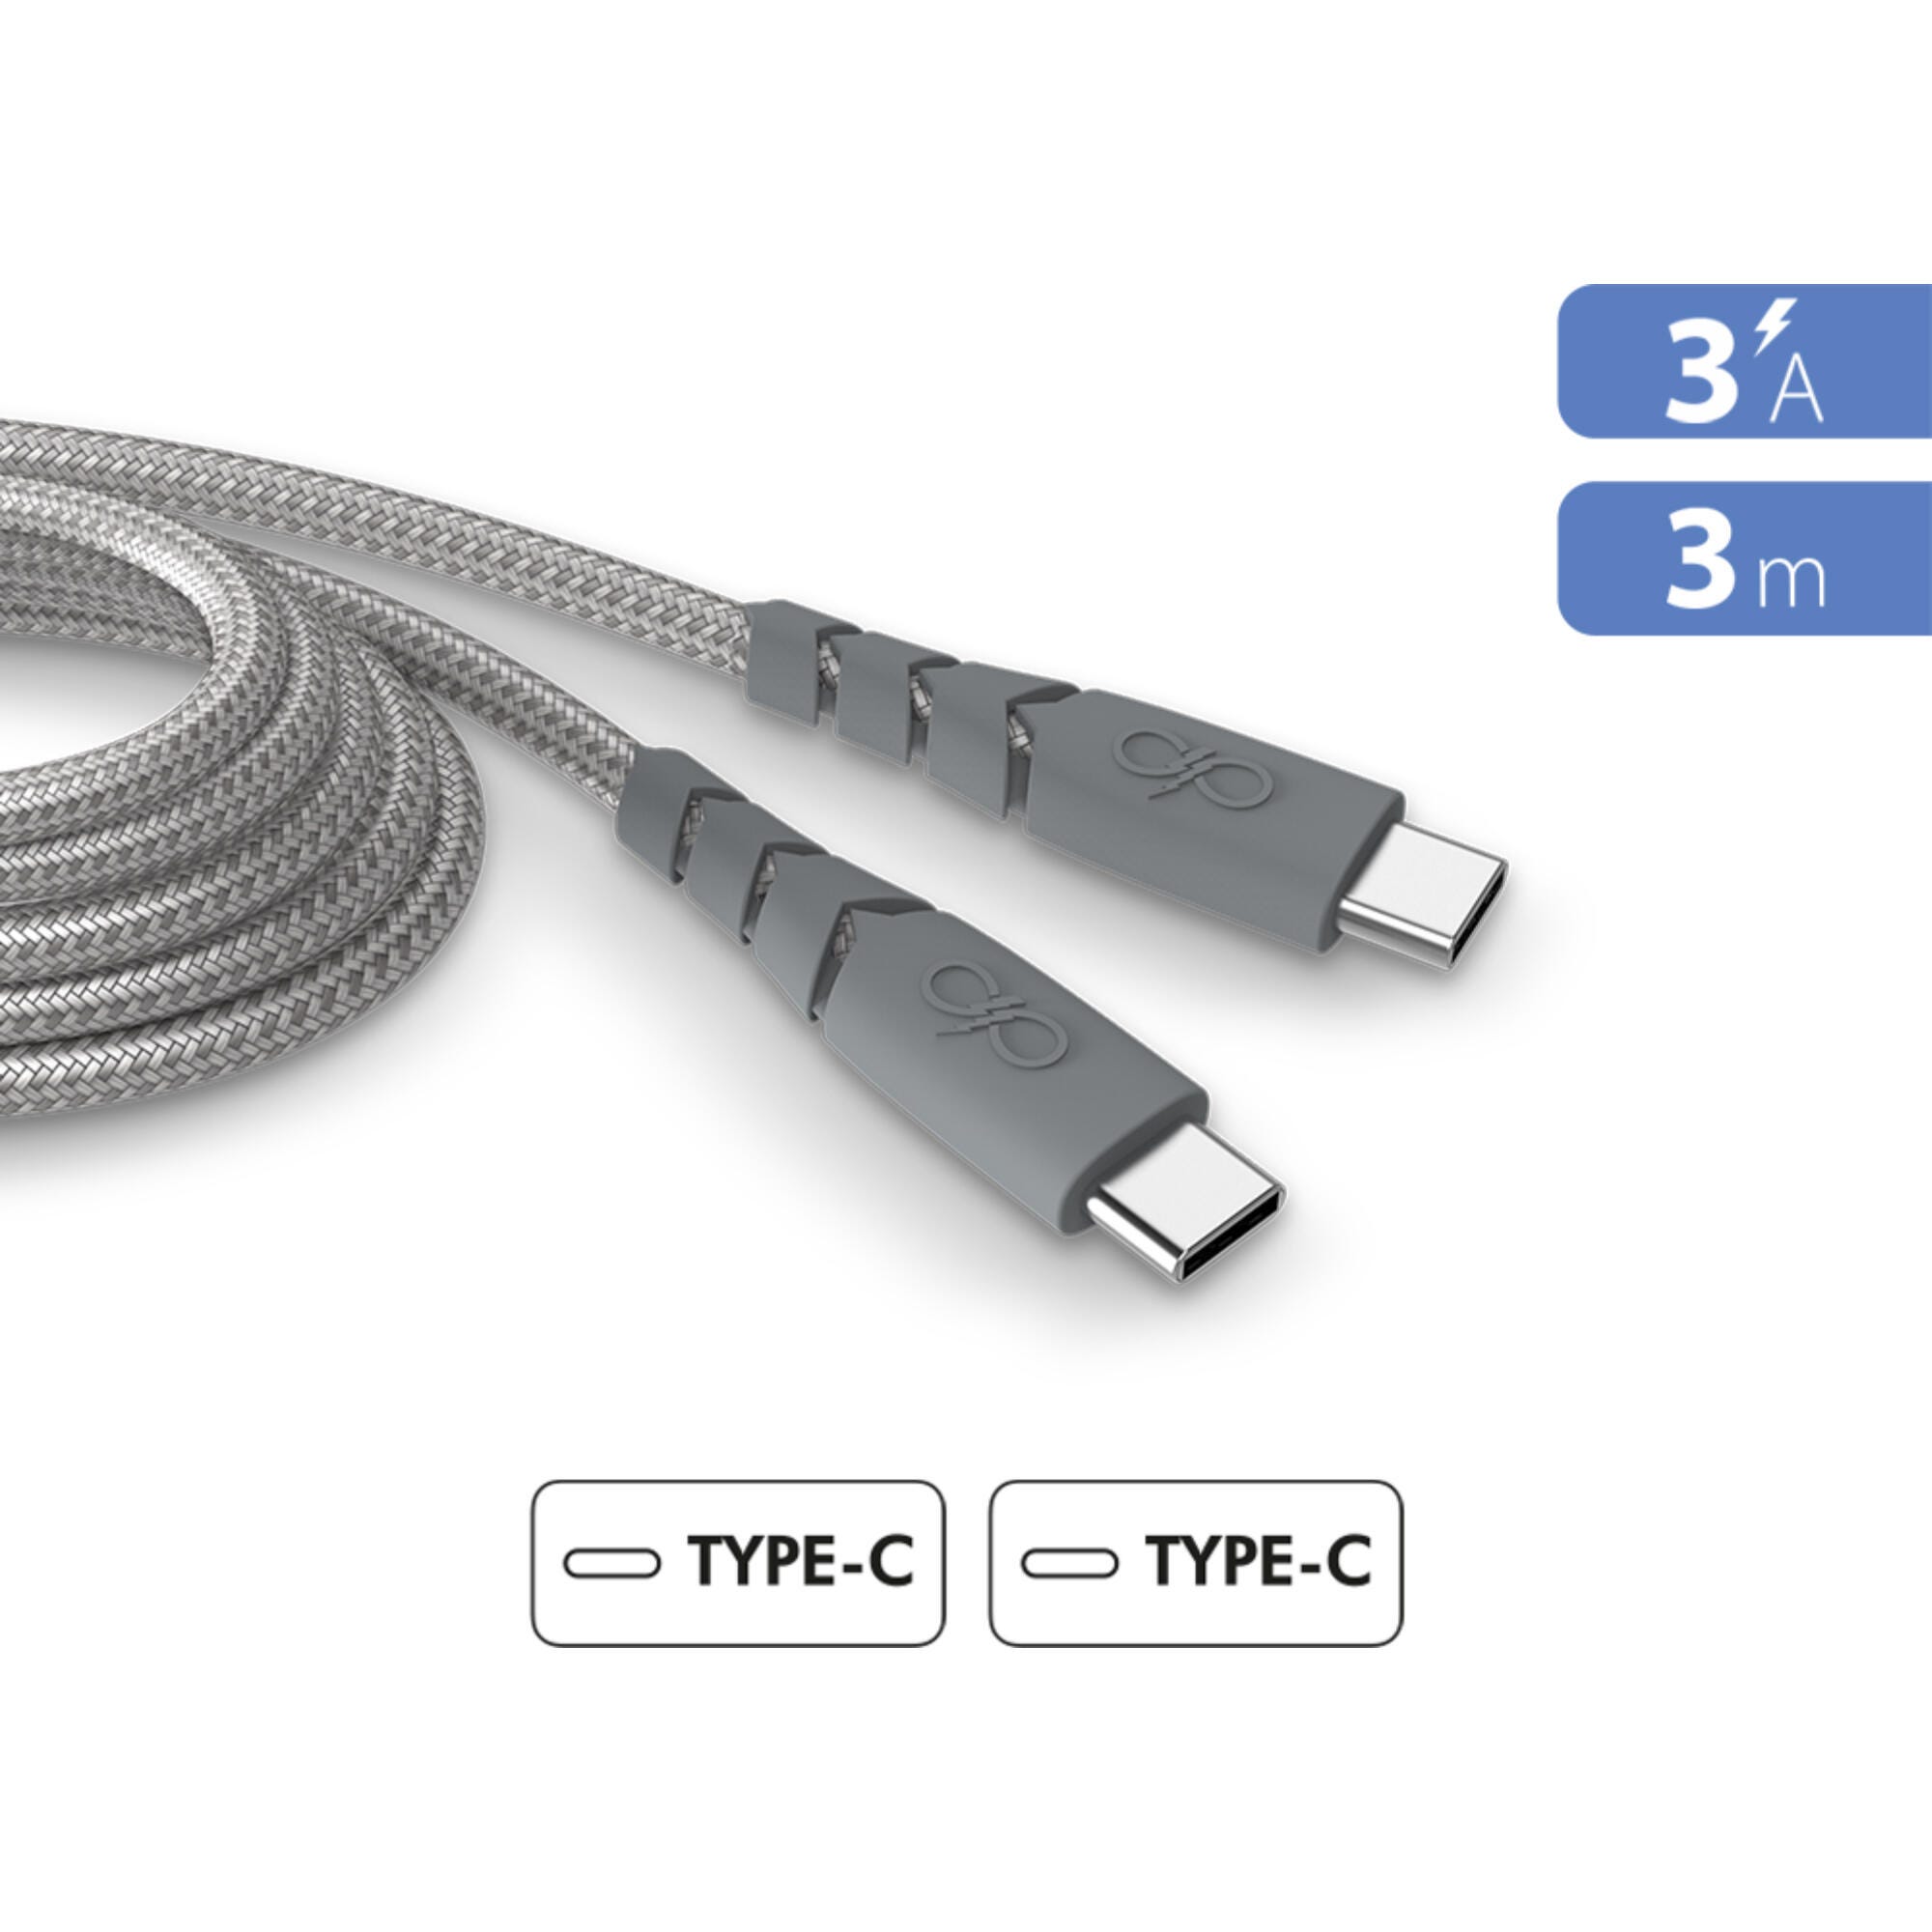 Cable USB Tipo C 2.0 a USB Tipo C - 3M